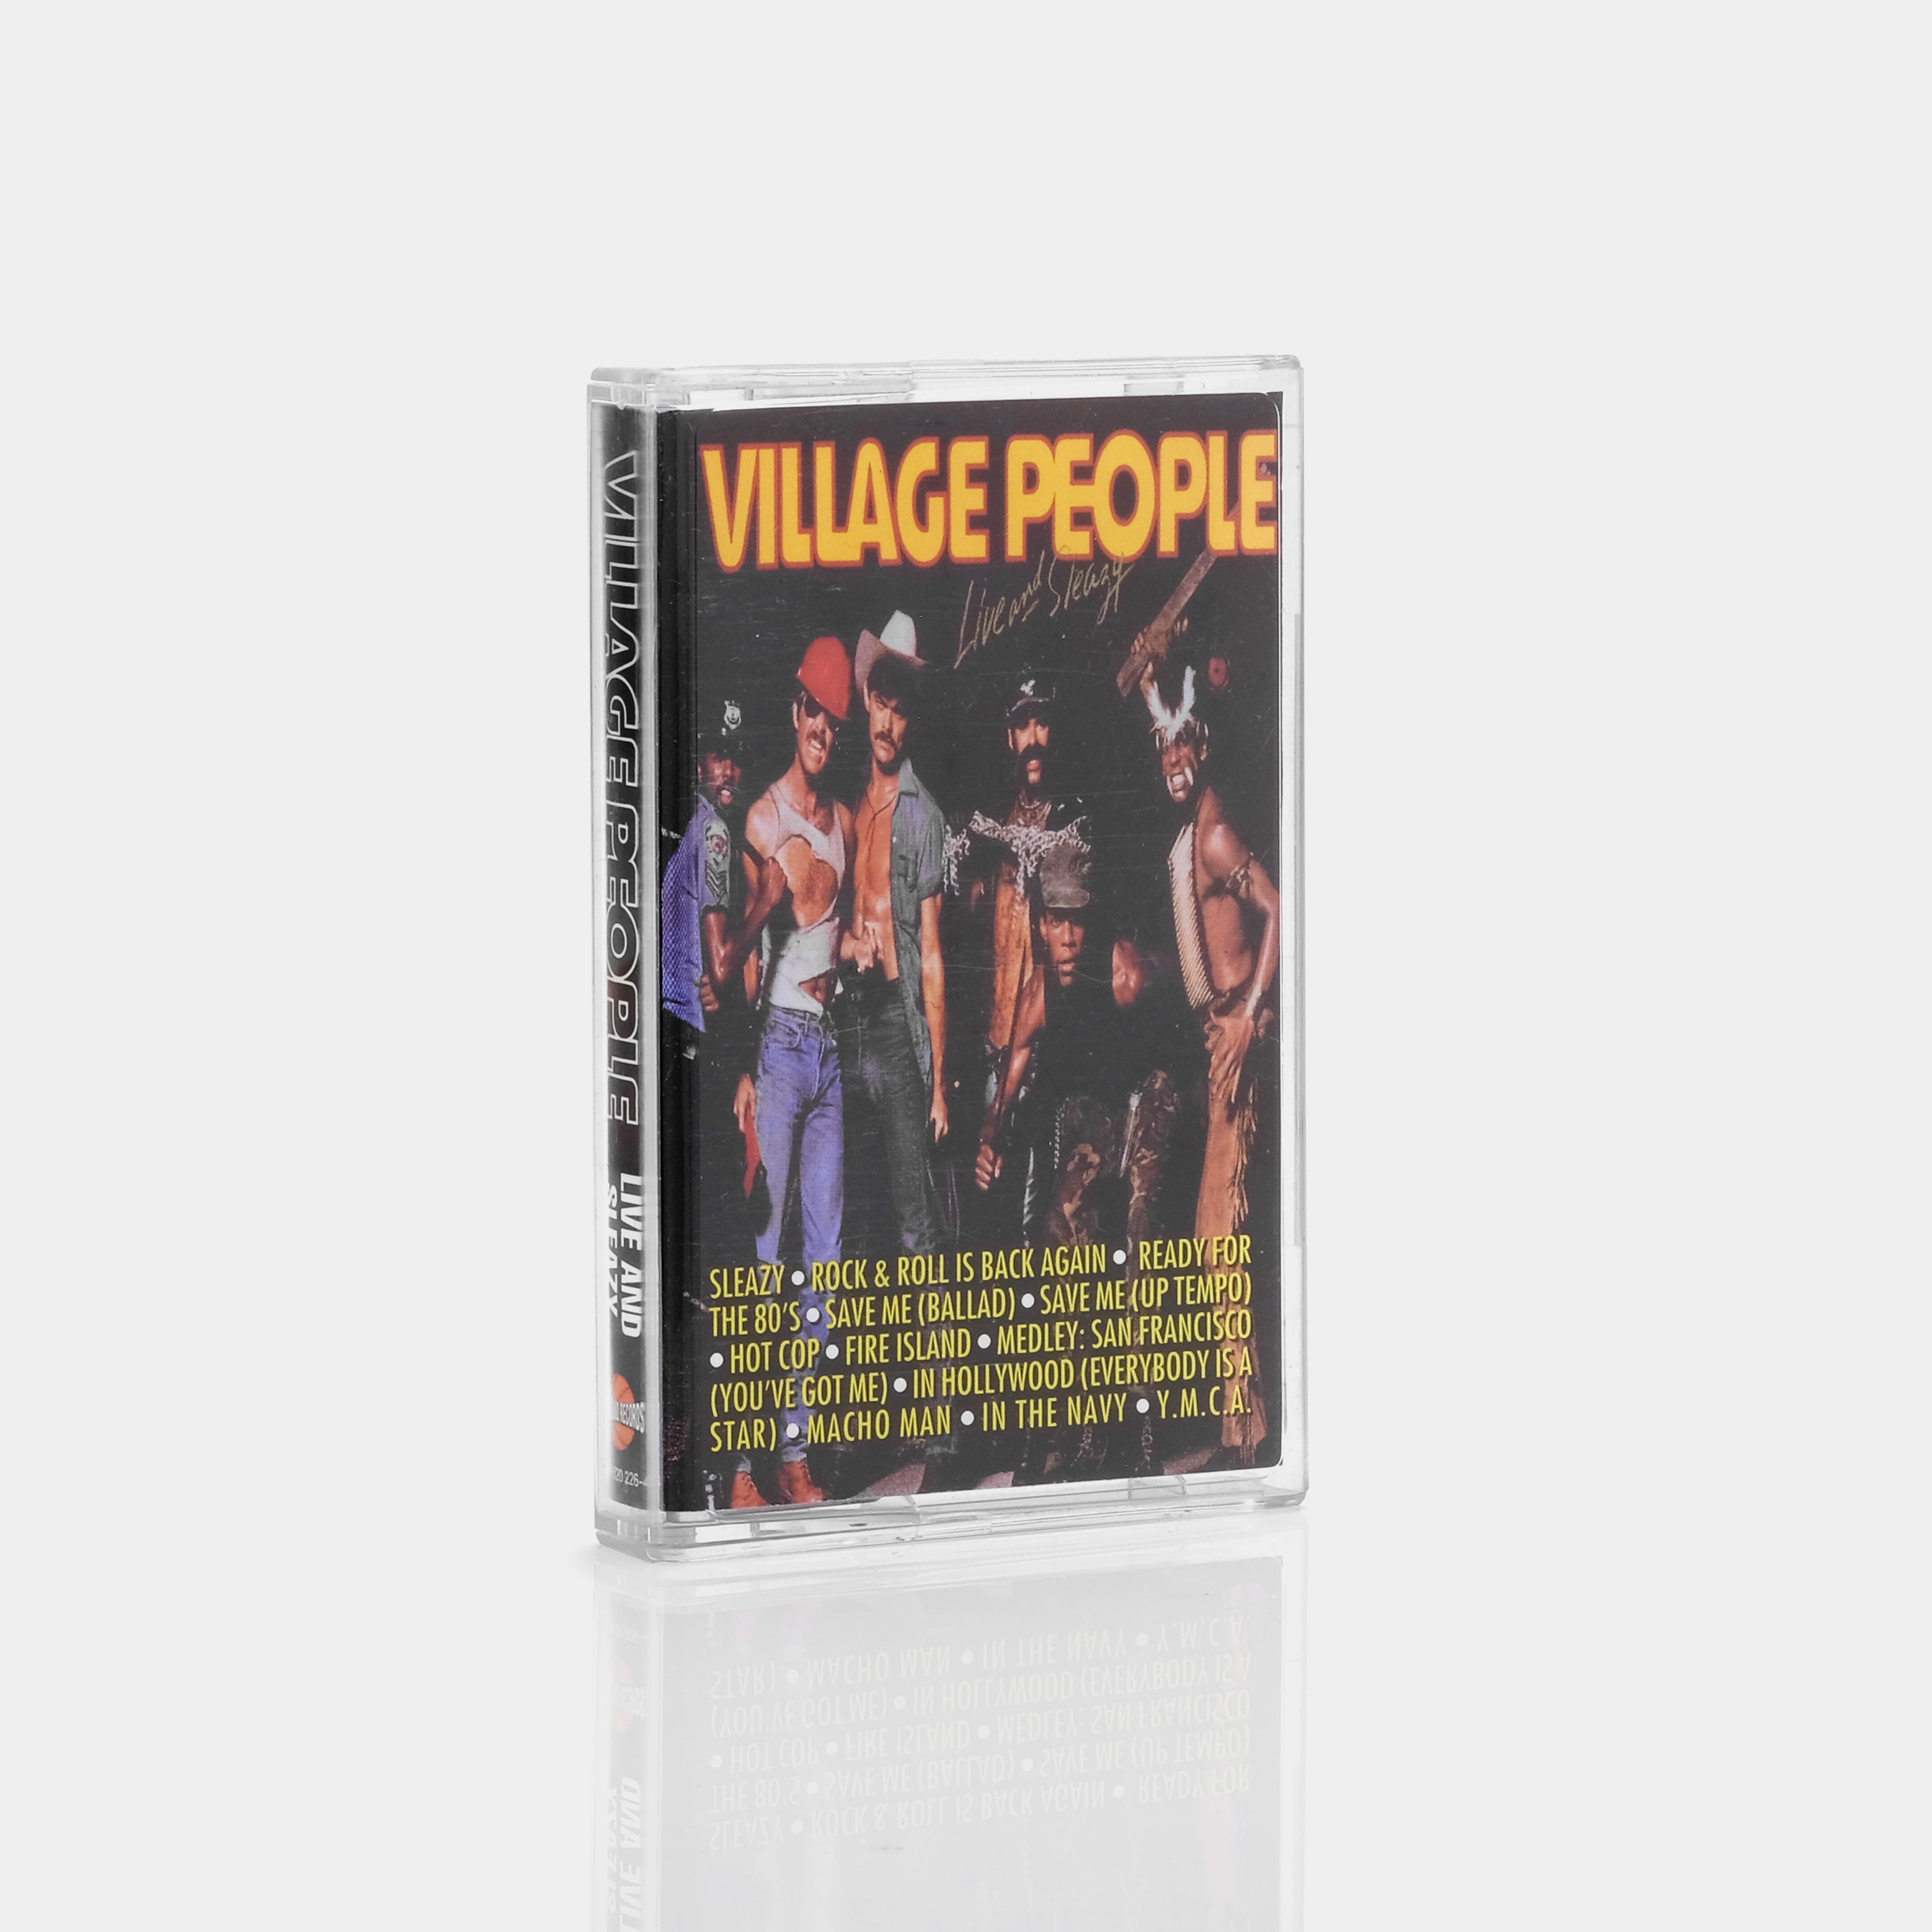 Village People - Live And Sleazy Cassette Tape